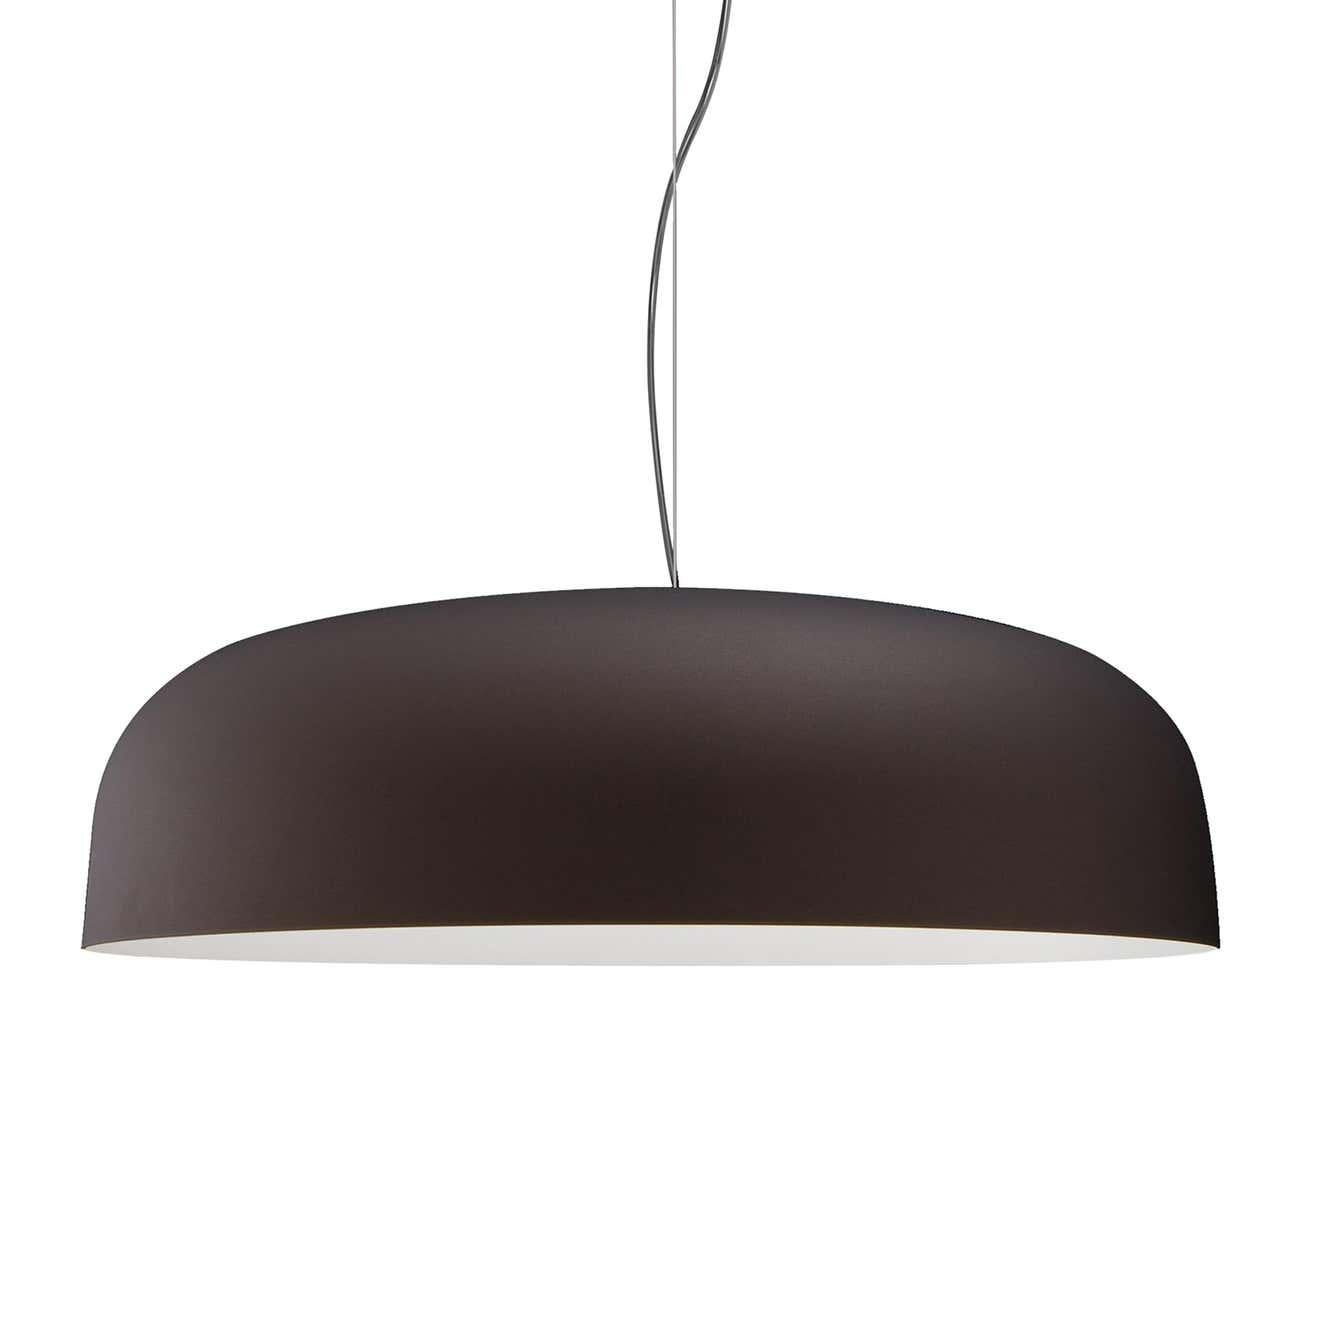 Francesco Rota Suspension Lamp 'Canopy' 422 Bronze and White by Oluce In New Condition For Sale In Barcelona, Barcelona